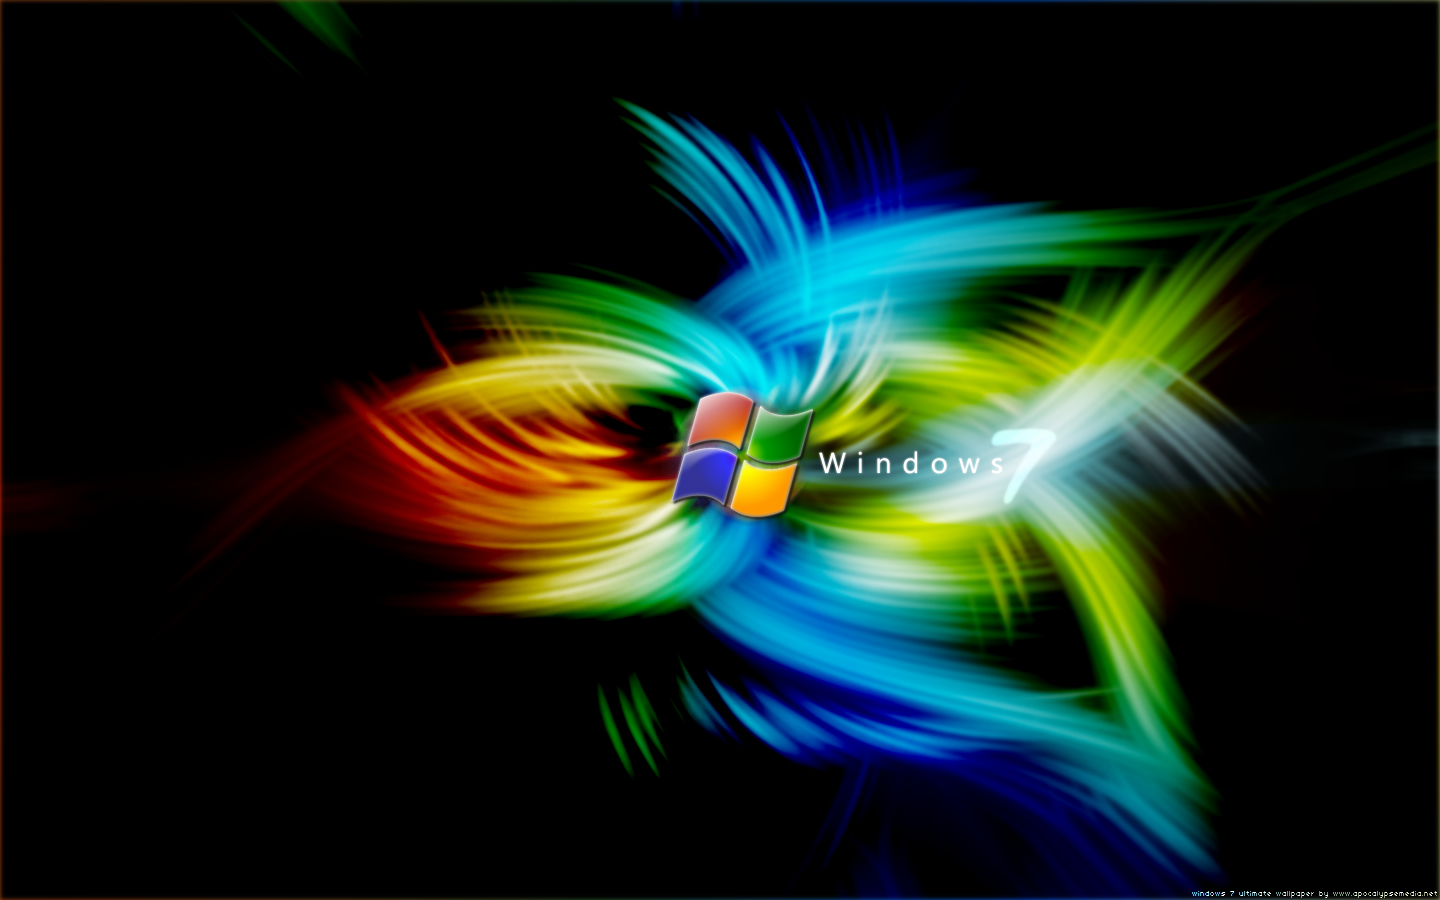 Windows 7 Red Wallpapers - Wallpaper Cave